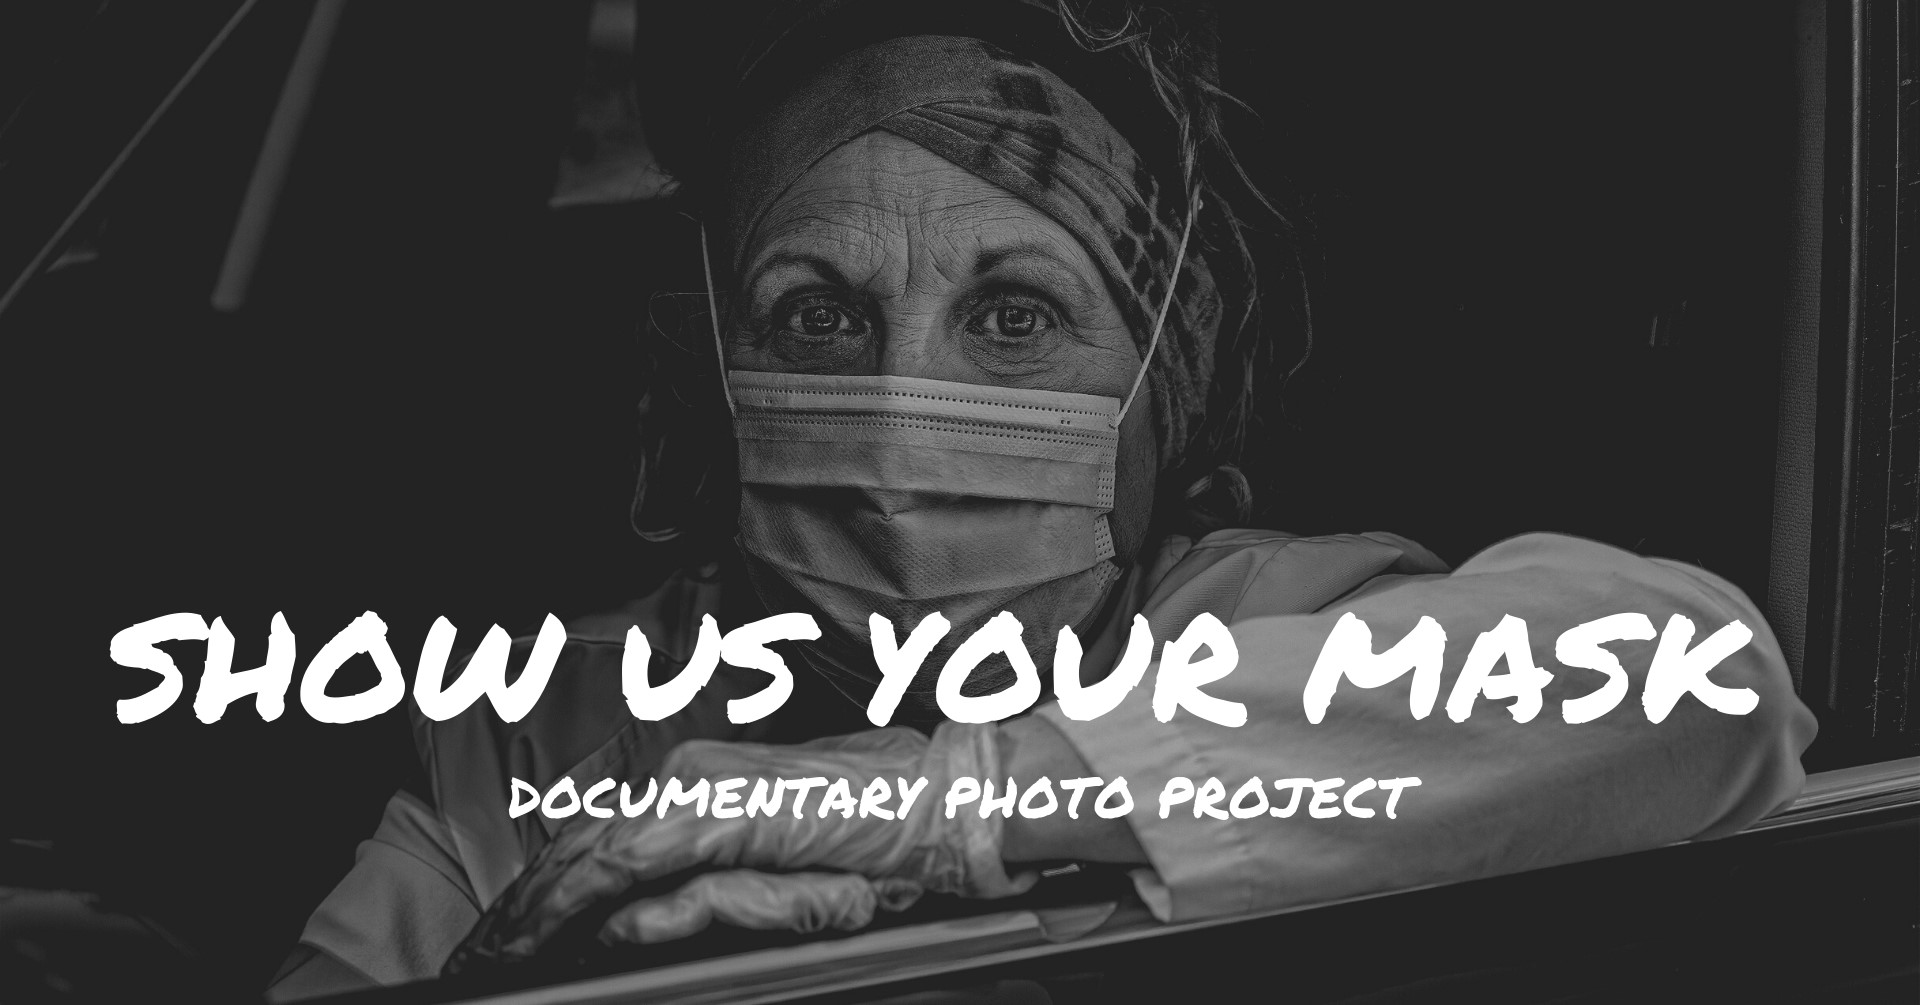 “Show us your mask” photo op takes place in Prestonsburg documenting pandemic